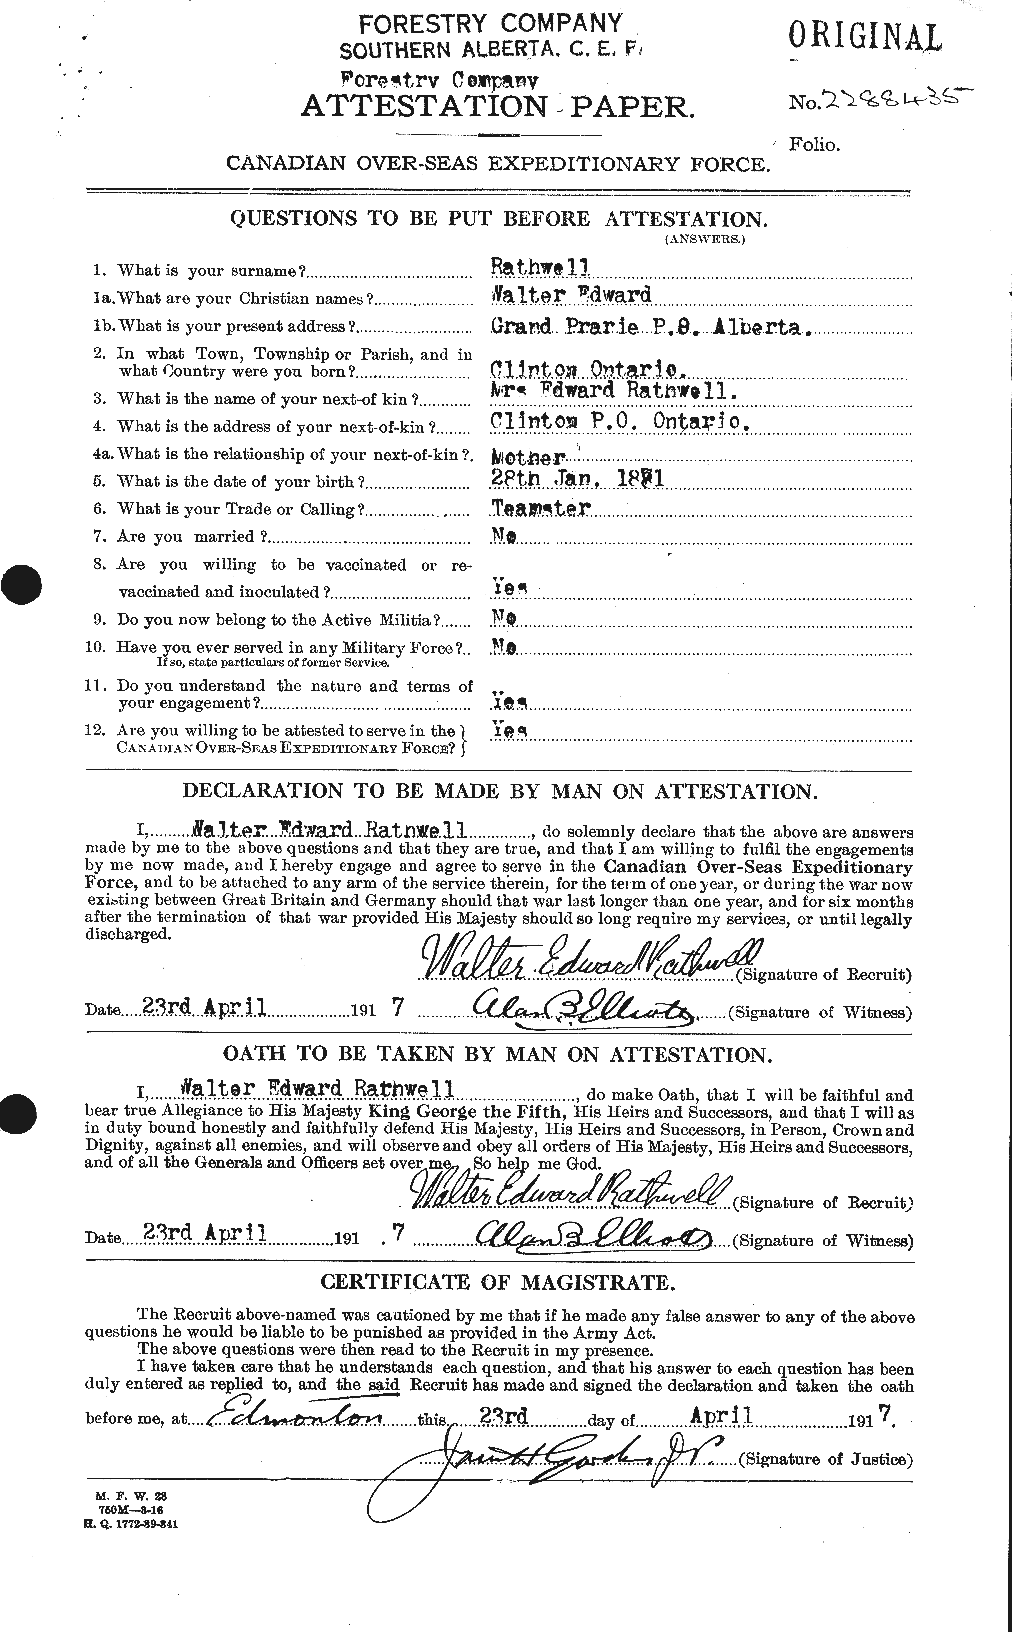 Personnel Records of the First World War - CEF 595631a